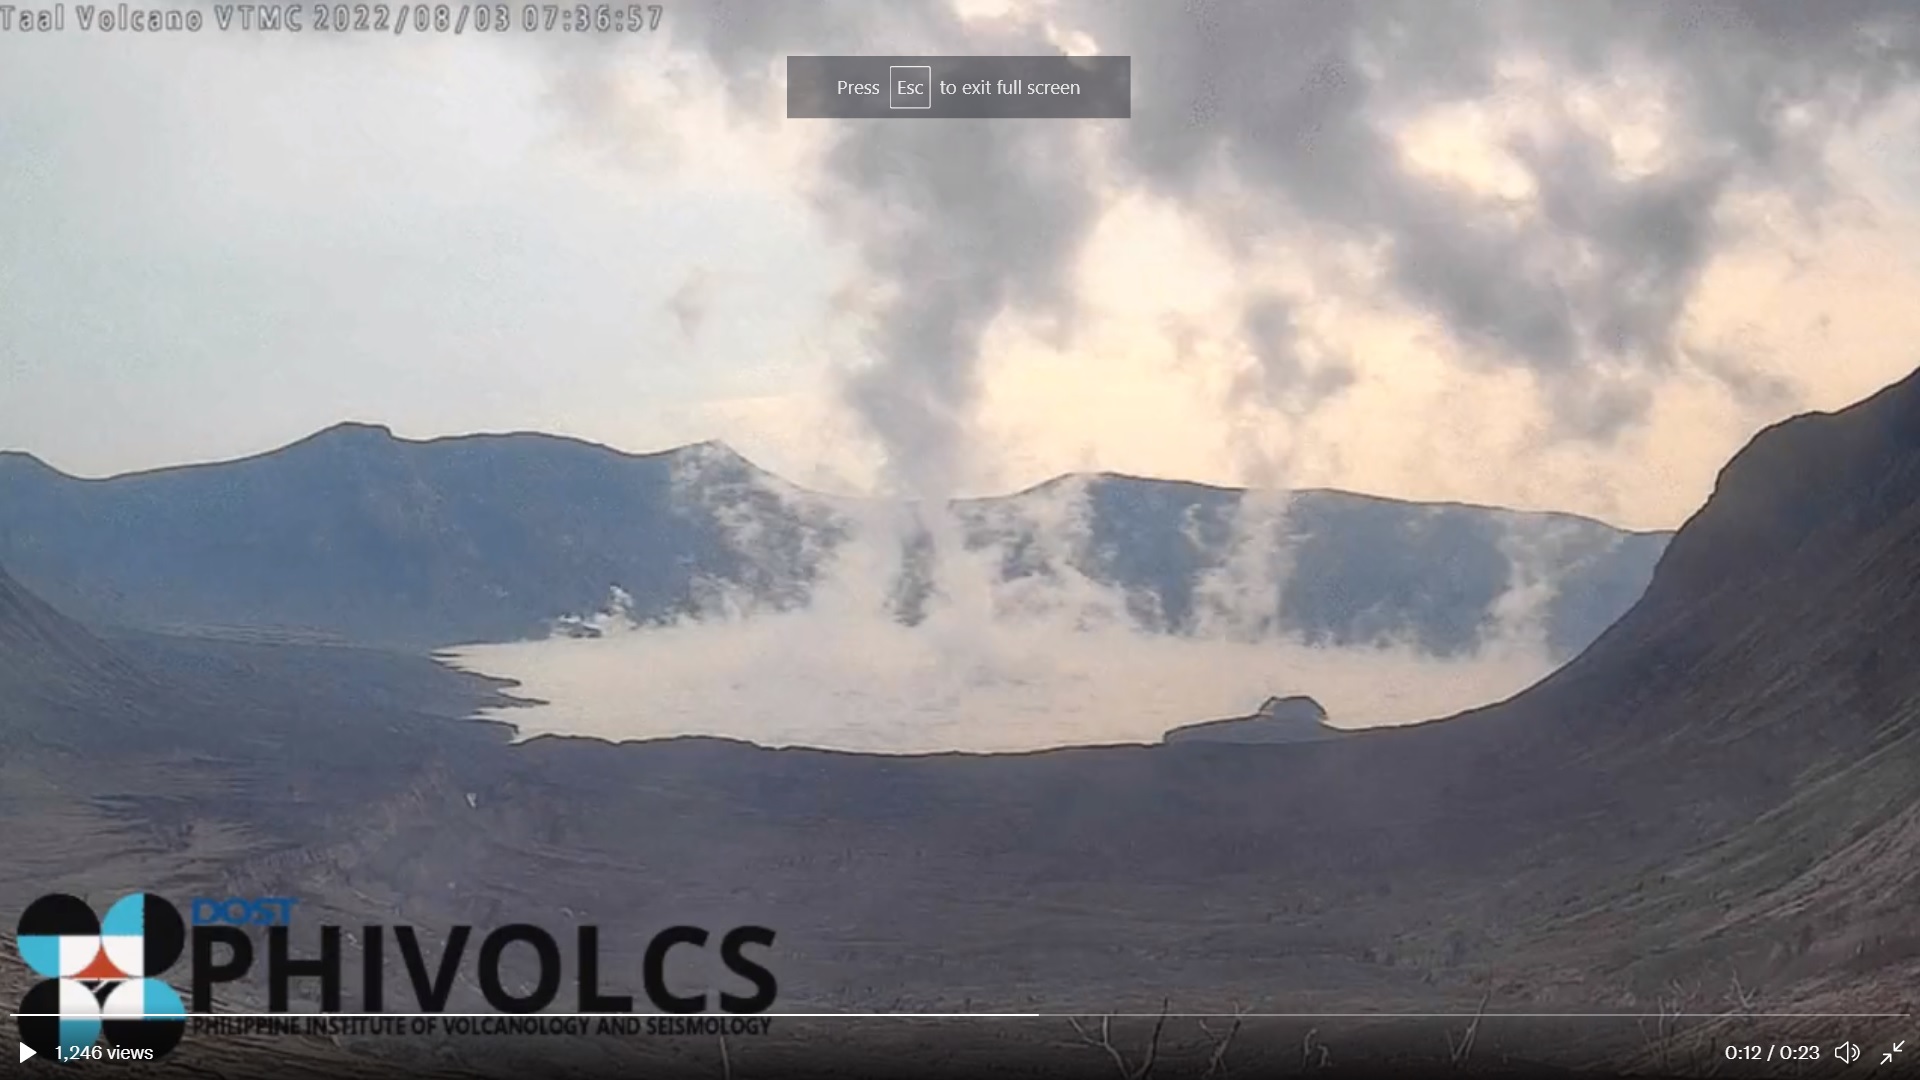 Elevated degassing activity at Taal volcano today (image: PHIVOLCS)